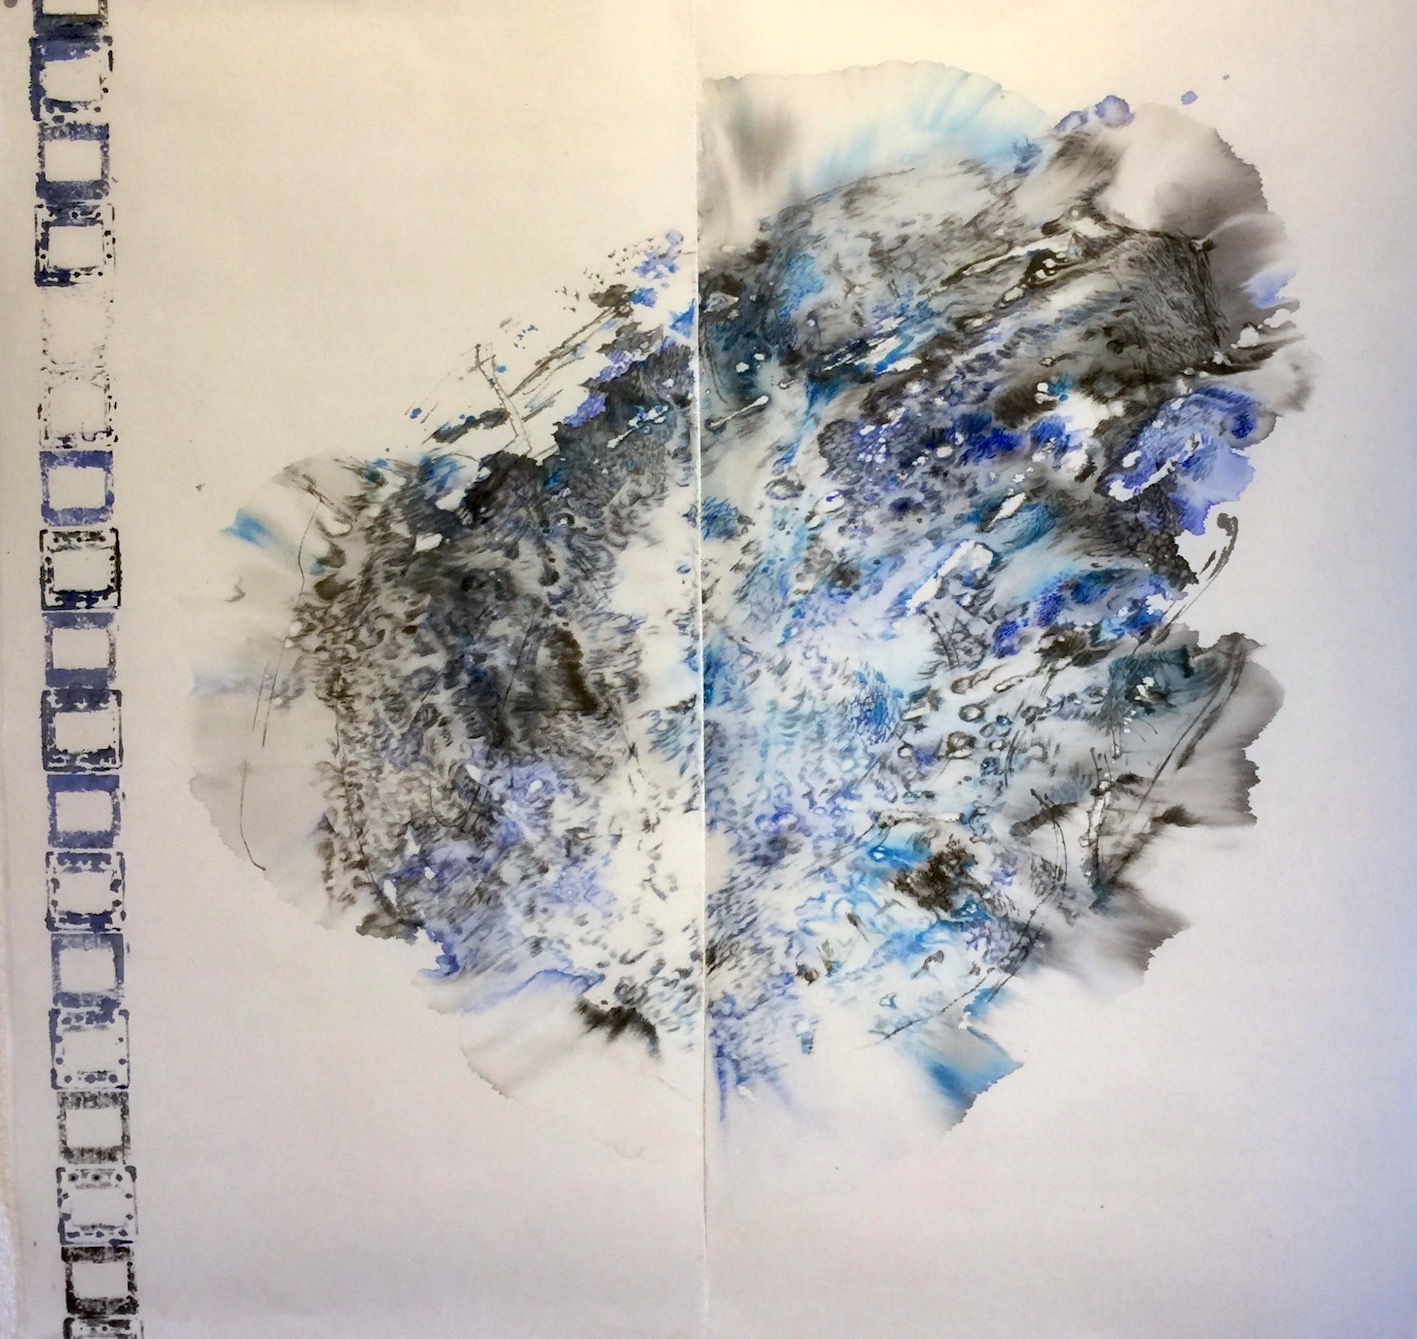 Rock Fall：Out of Time 非時空落石 88.5 X 88.5 cm Sumi ink,water colour, acrylic 墨、水彩絵具、アクリル. 2019